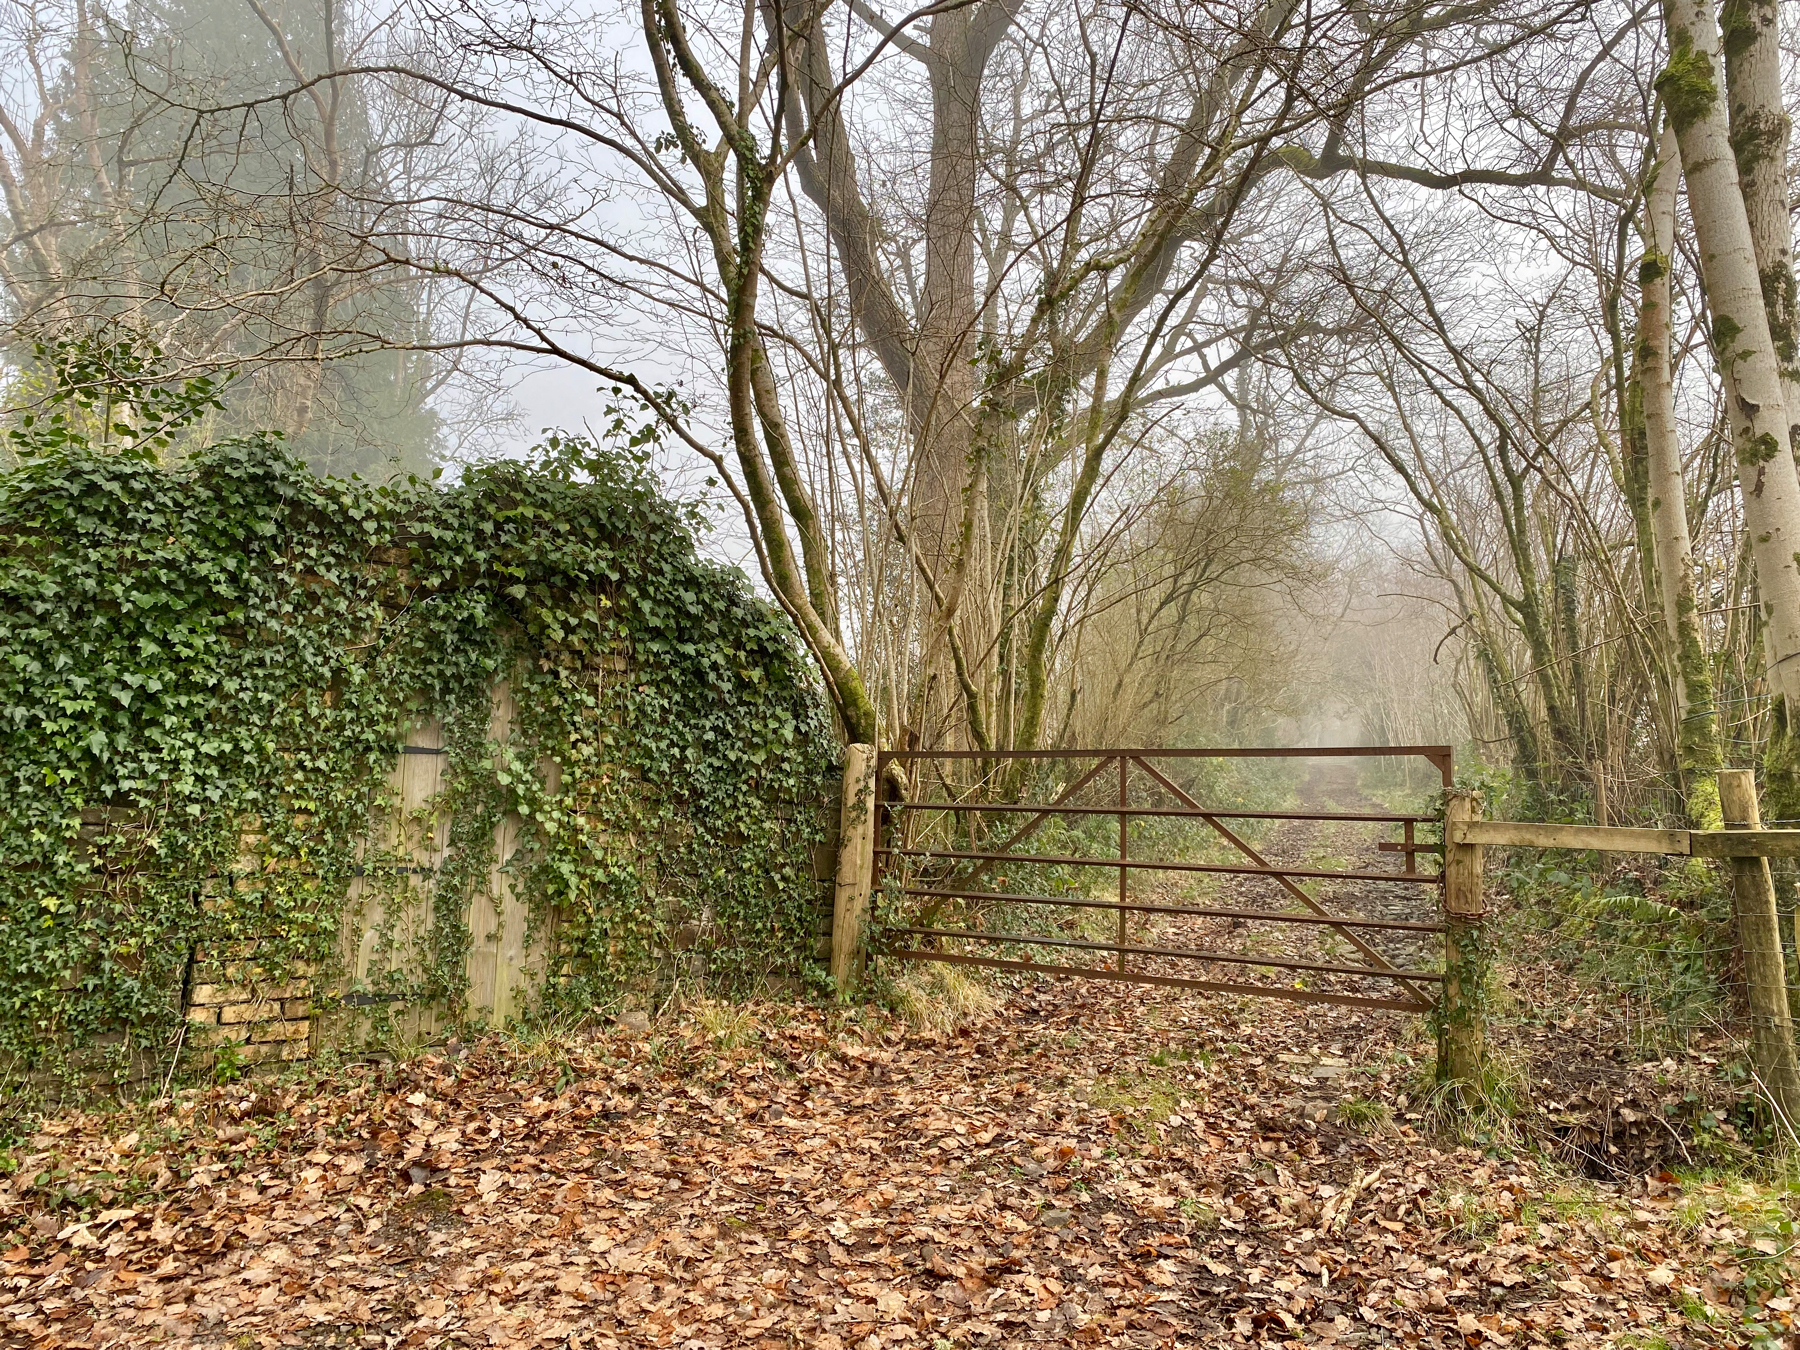 A rusty metal gate barring a misty, tree-lined woodland path with ivy-covered structures and a leaf-strewn ground.